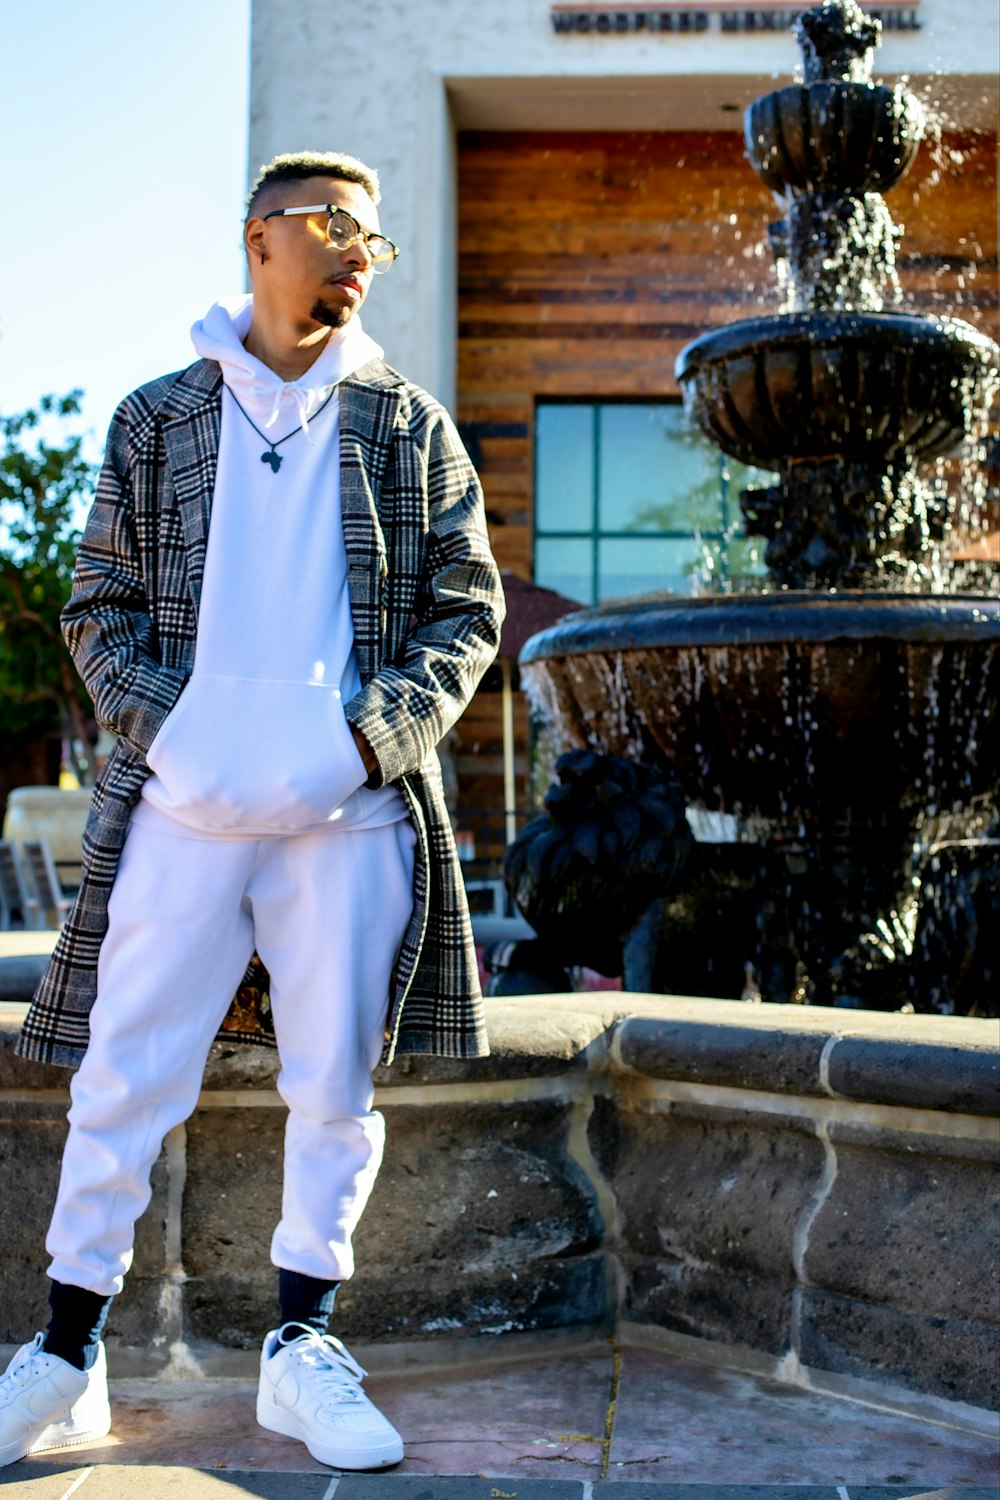 man in blue and white striped dress shirt and white pants standing near fountain during daytime